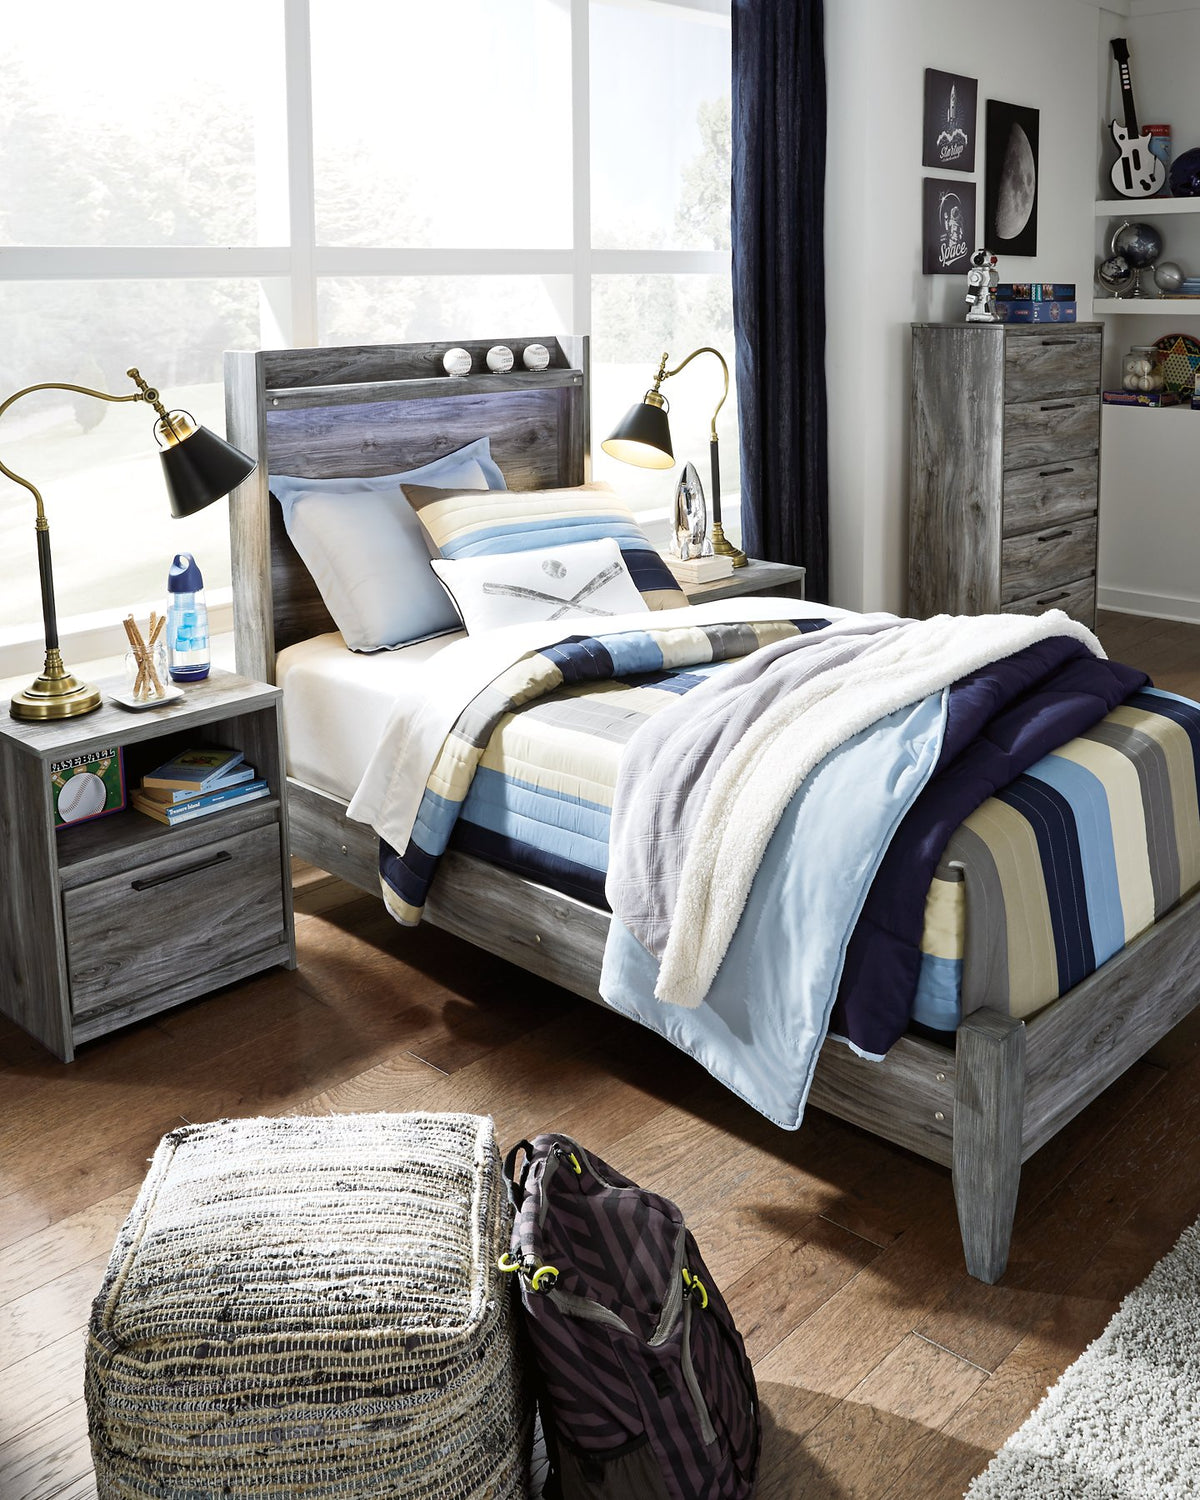 Baystorm Youth Bed - Half Price Furniture